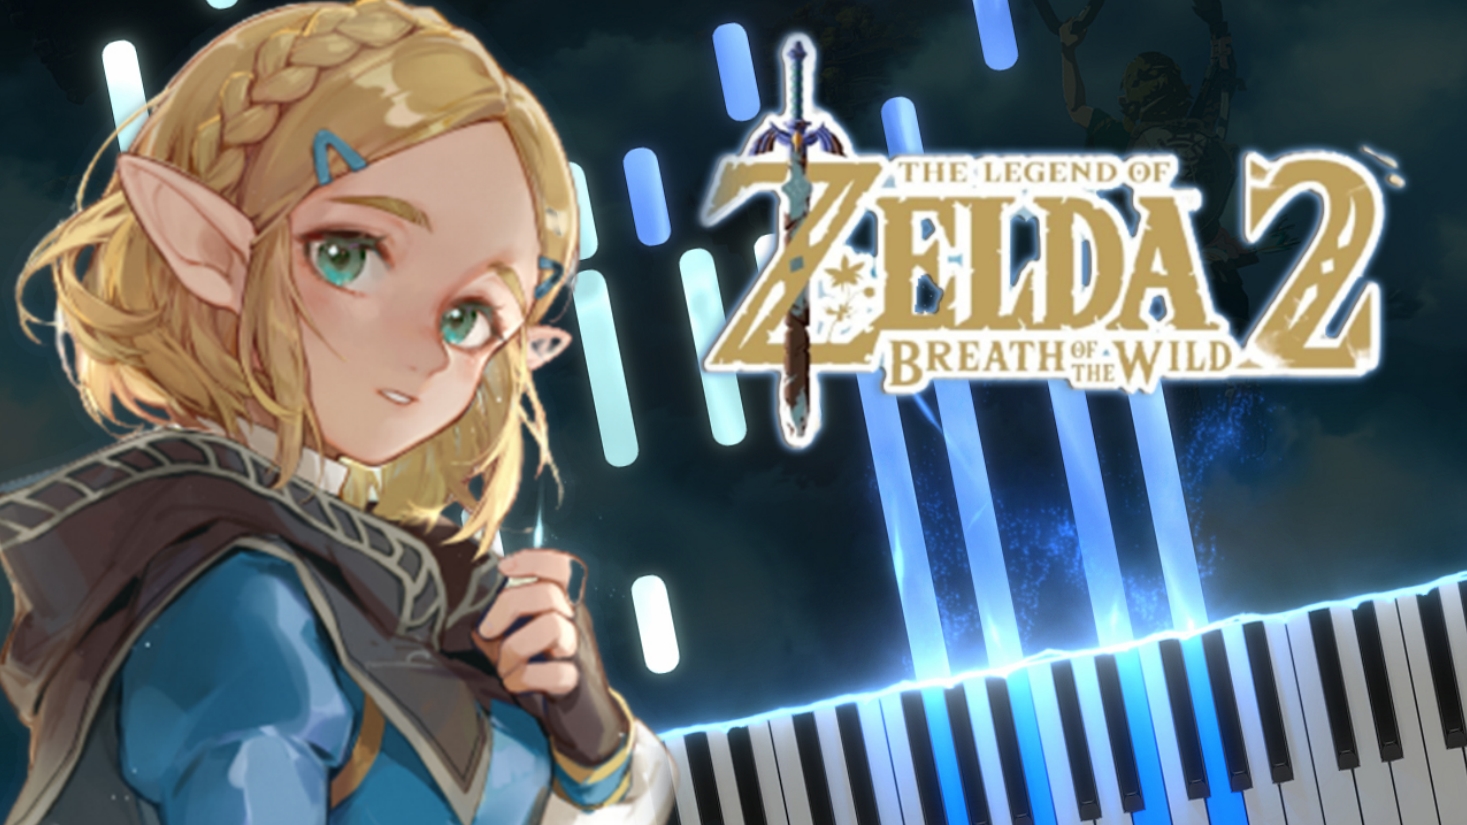 Teaser E3 2021 (The Legend of Zelda: Breath of the Wild 2) - Synthesia / Piano Tutorial